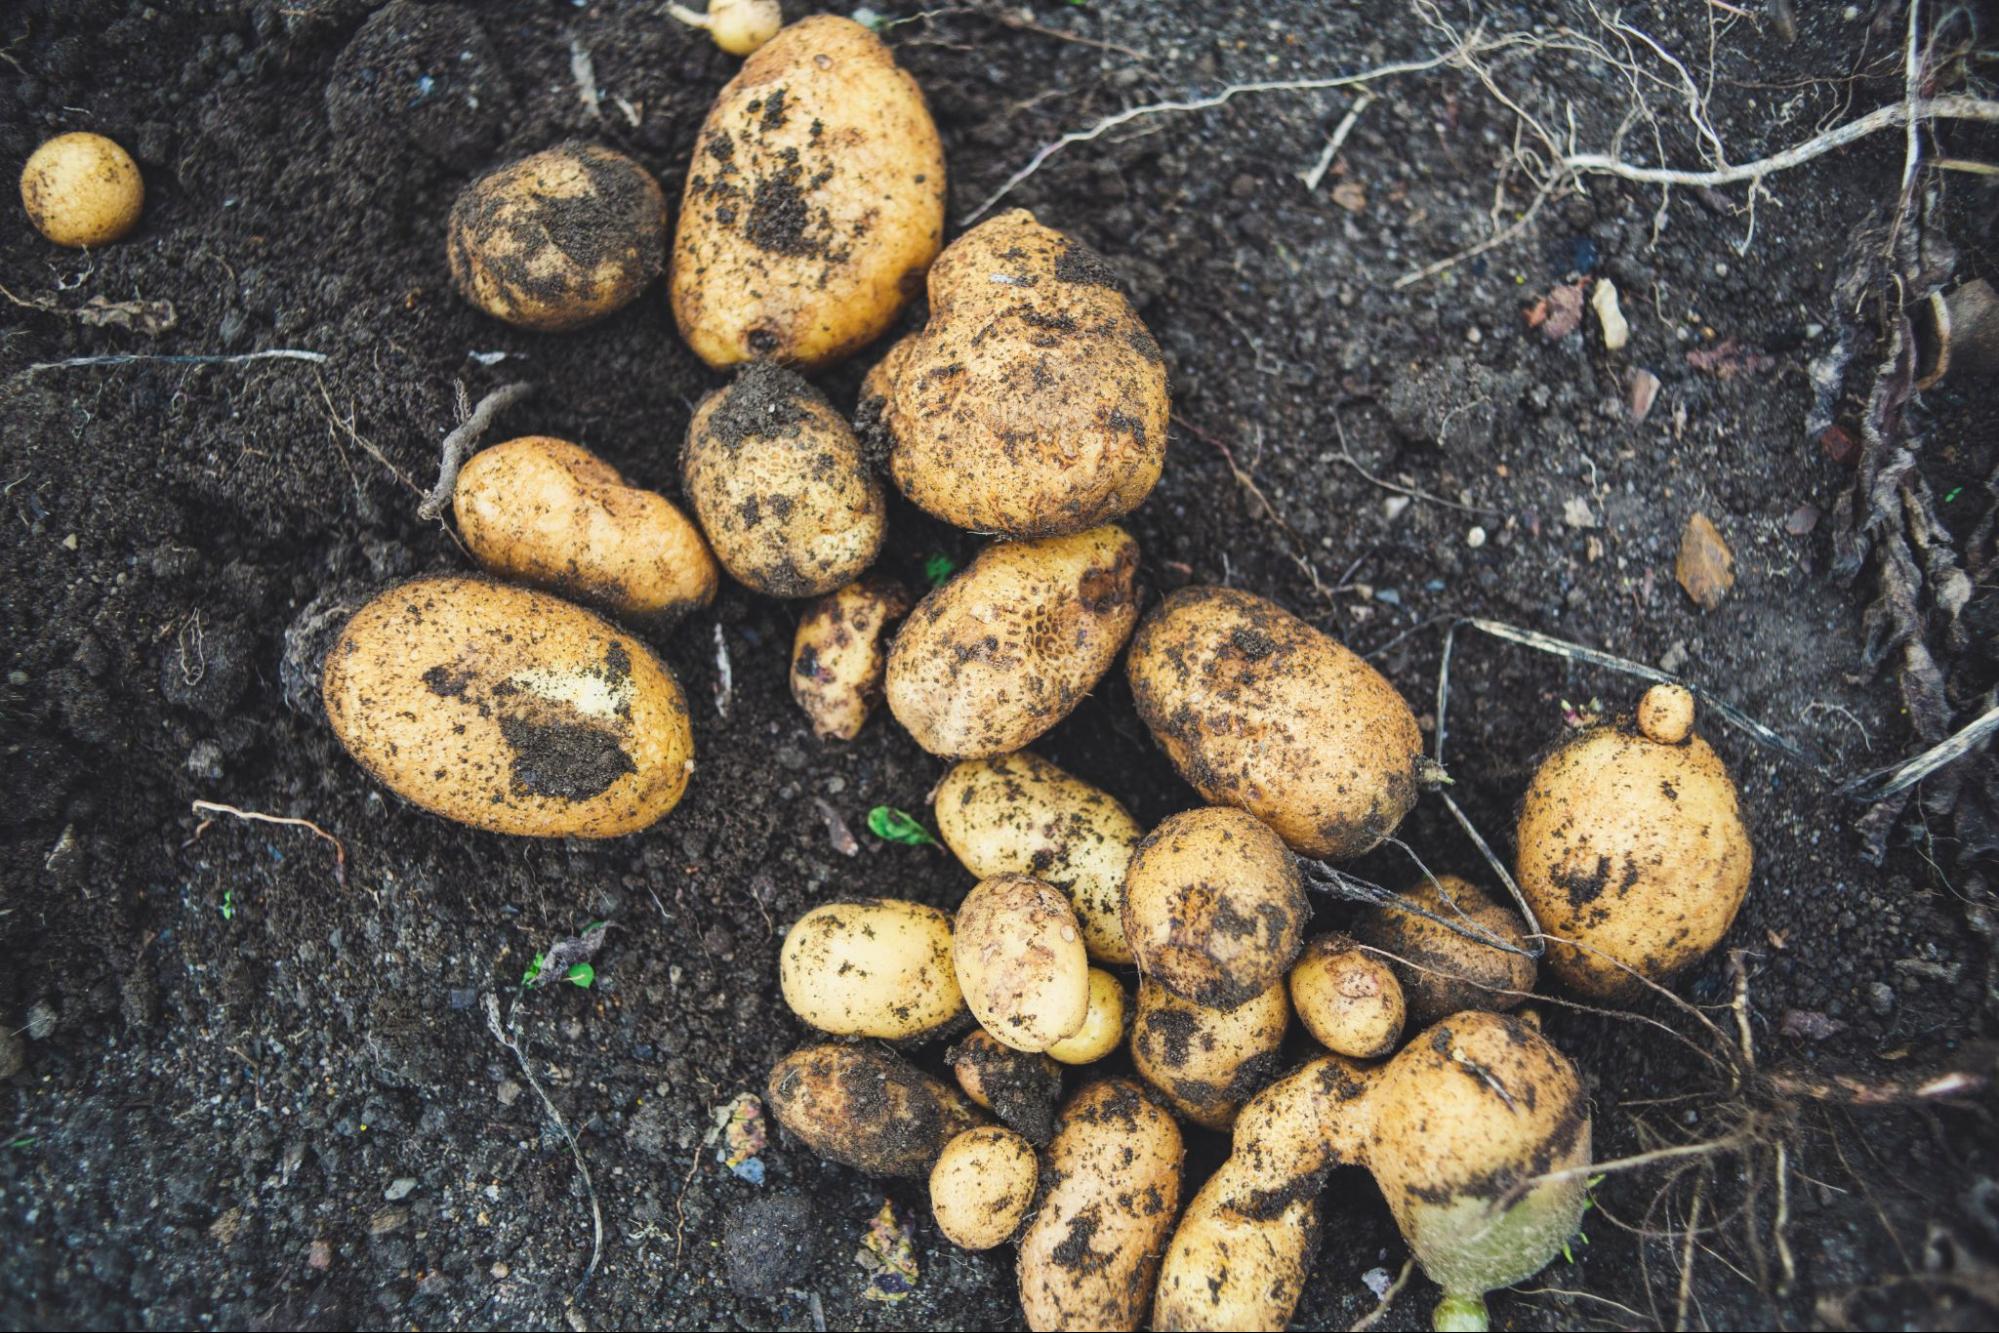 White potatoes laying on the ground pulled out from the soil